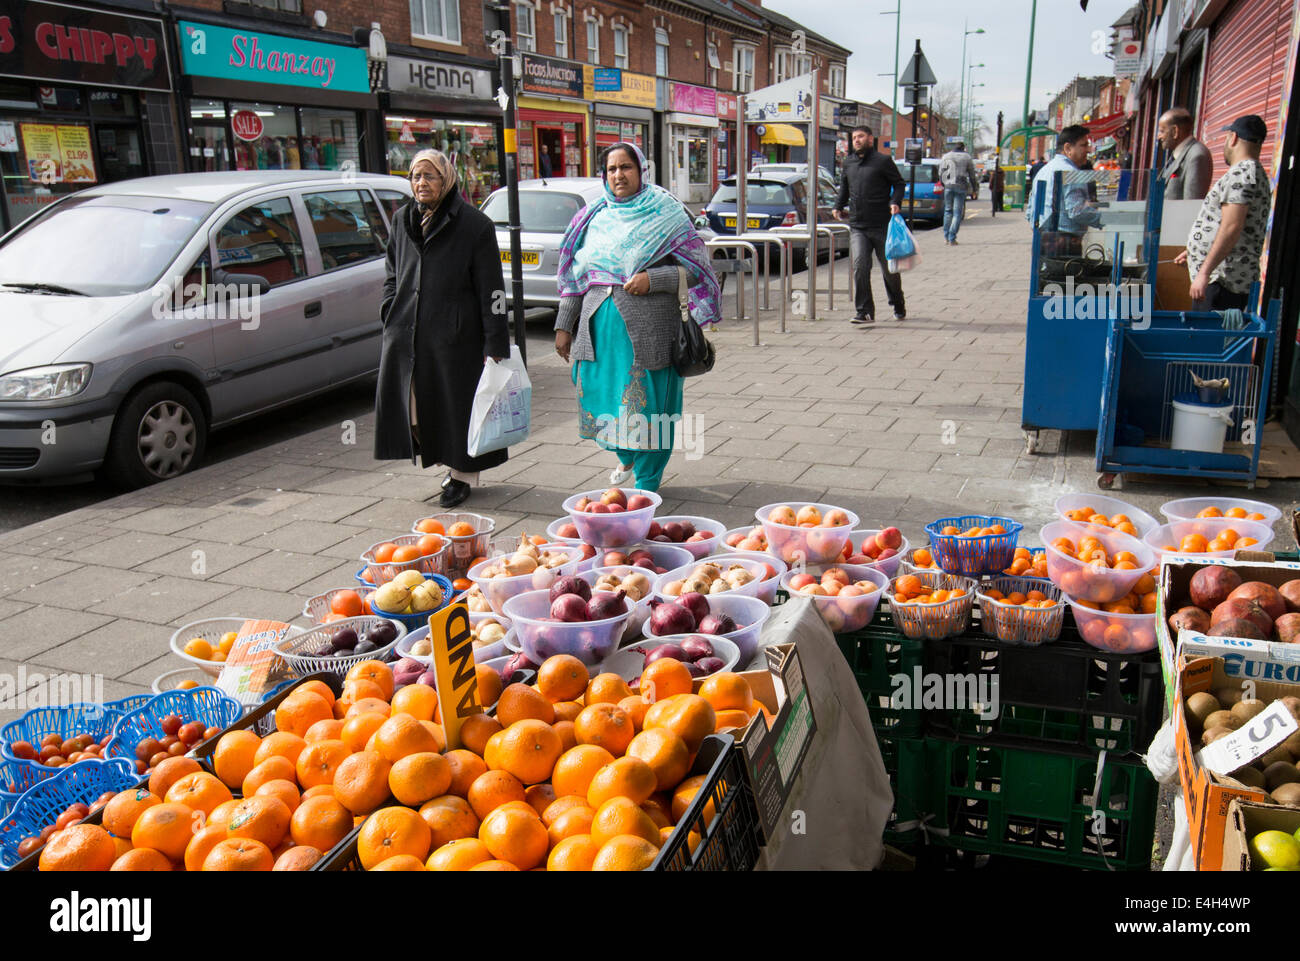 Two Muslim women walk past a greengrocer in the centre of the mainly Asian area of Lozells in Birmingham, UK Stock Photo